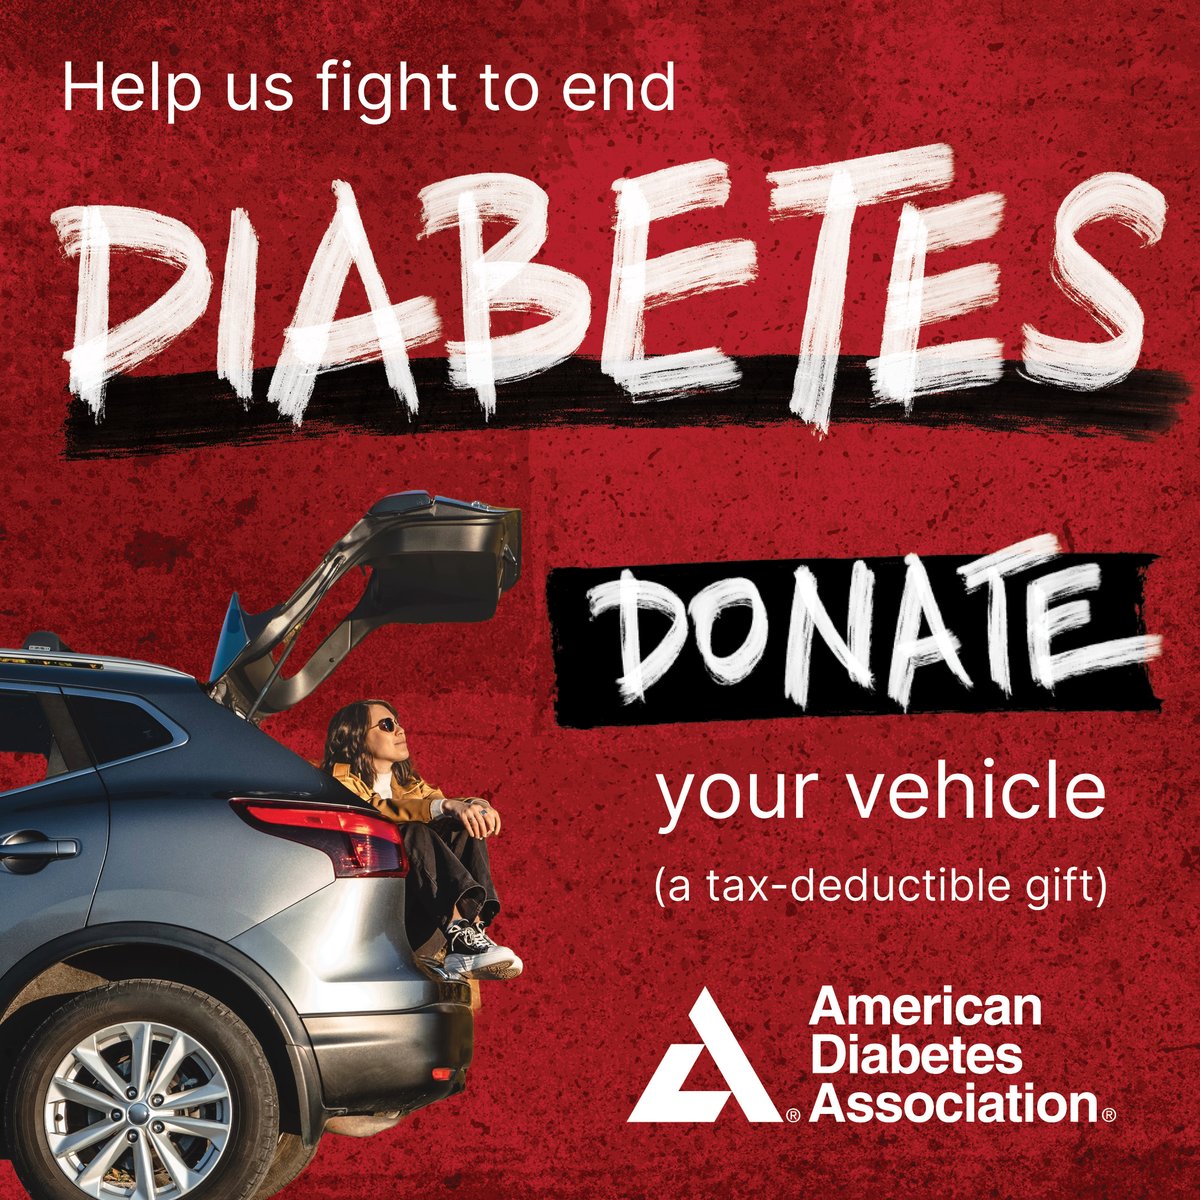 #DYK: That when you donate your vehicle to the ADA, it becomes tax-deductible? Your generous donation can support the over 38 million Americans living with diabetes! 💙 Learn more about how you can make a difference at diabetes.org/cars. #WeFightDiabetes